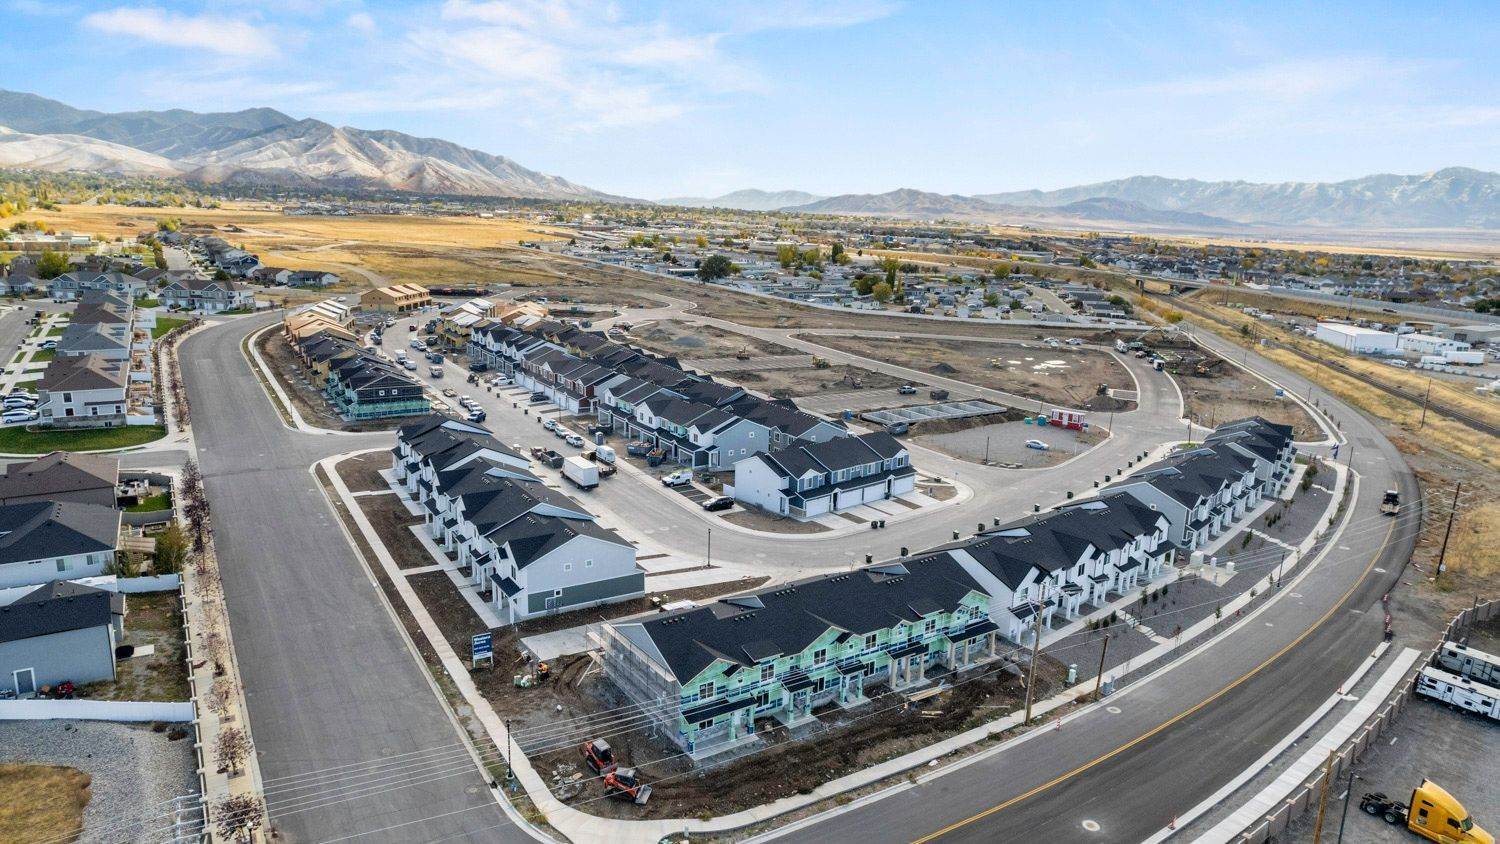 7. Western Acres xây dựng tại 259 East Serenity Avenue, Tooele, UT 84074